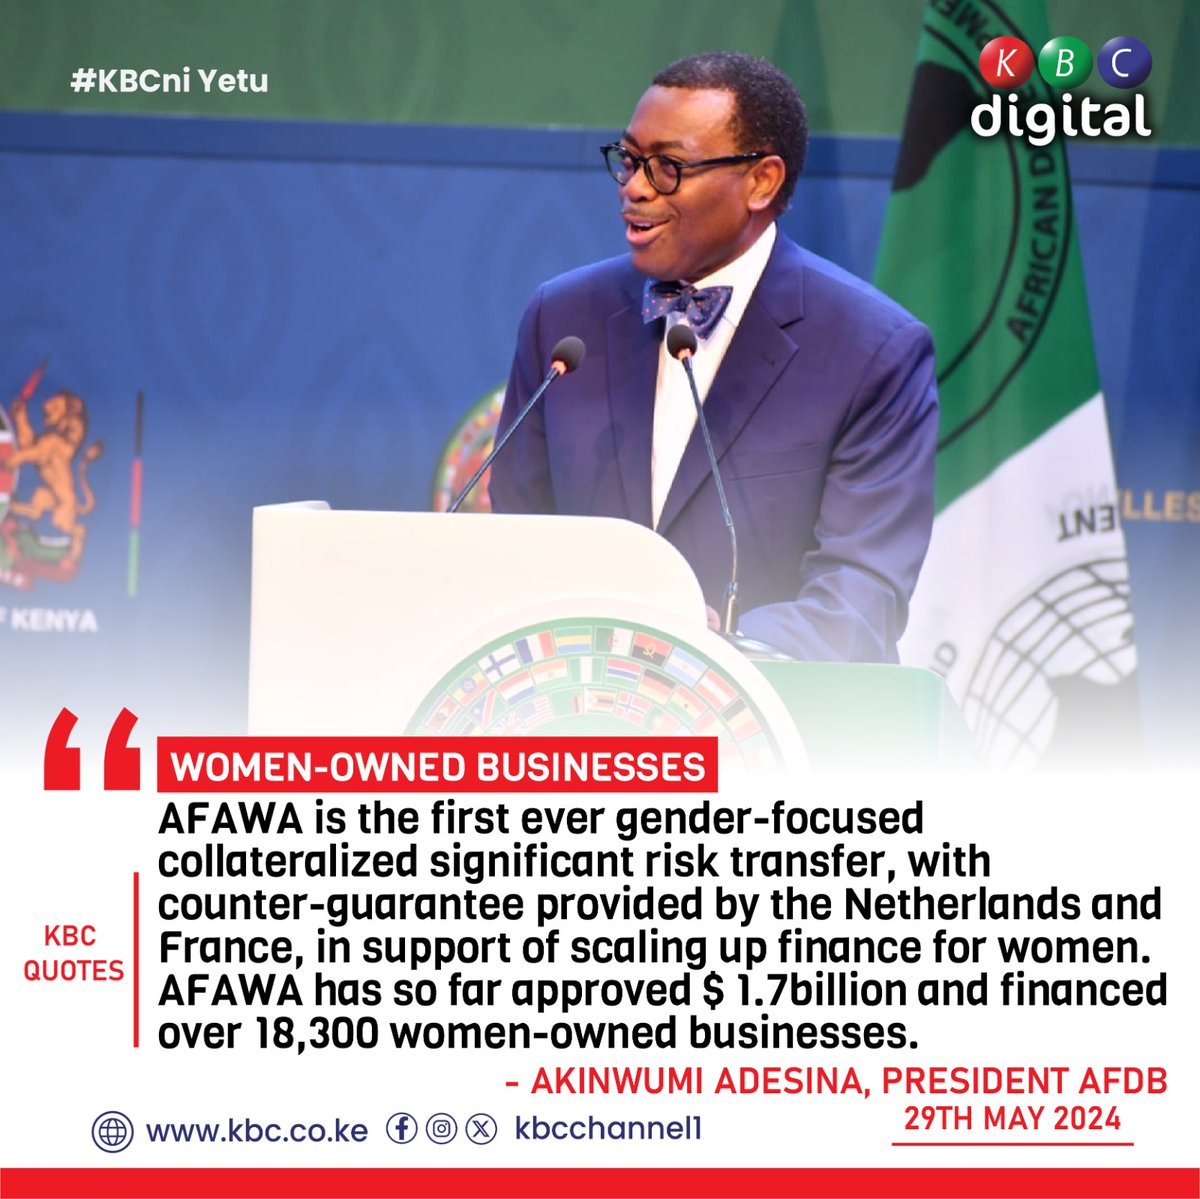 'AFAWA is the first ever gender-focused collateralized significant risk transfer, with counter-guarantee provided by the Netherlands and France, in support of scaling up finance for women.'
-Akinwumi Adesina
#AFDBAM2024 
@KeTreasury

@AfDB_Group ^EM